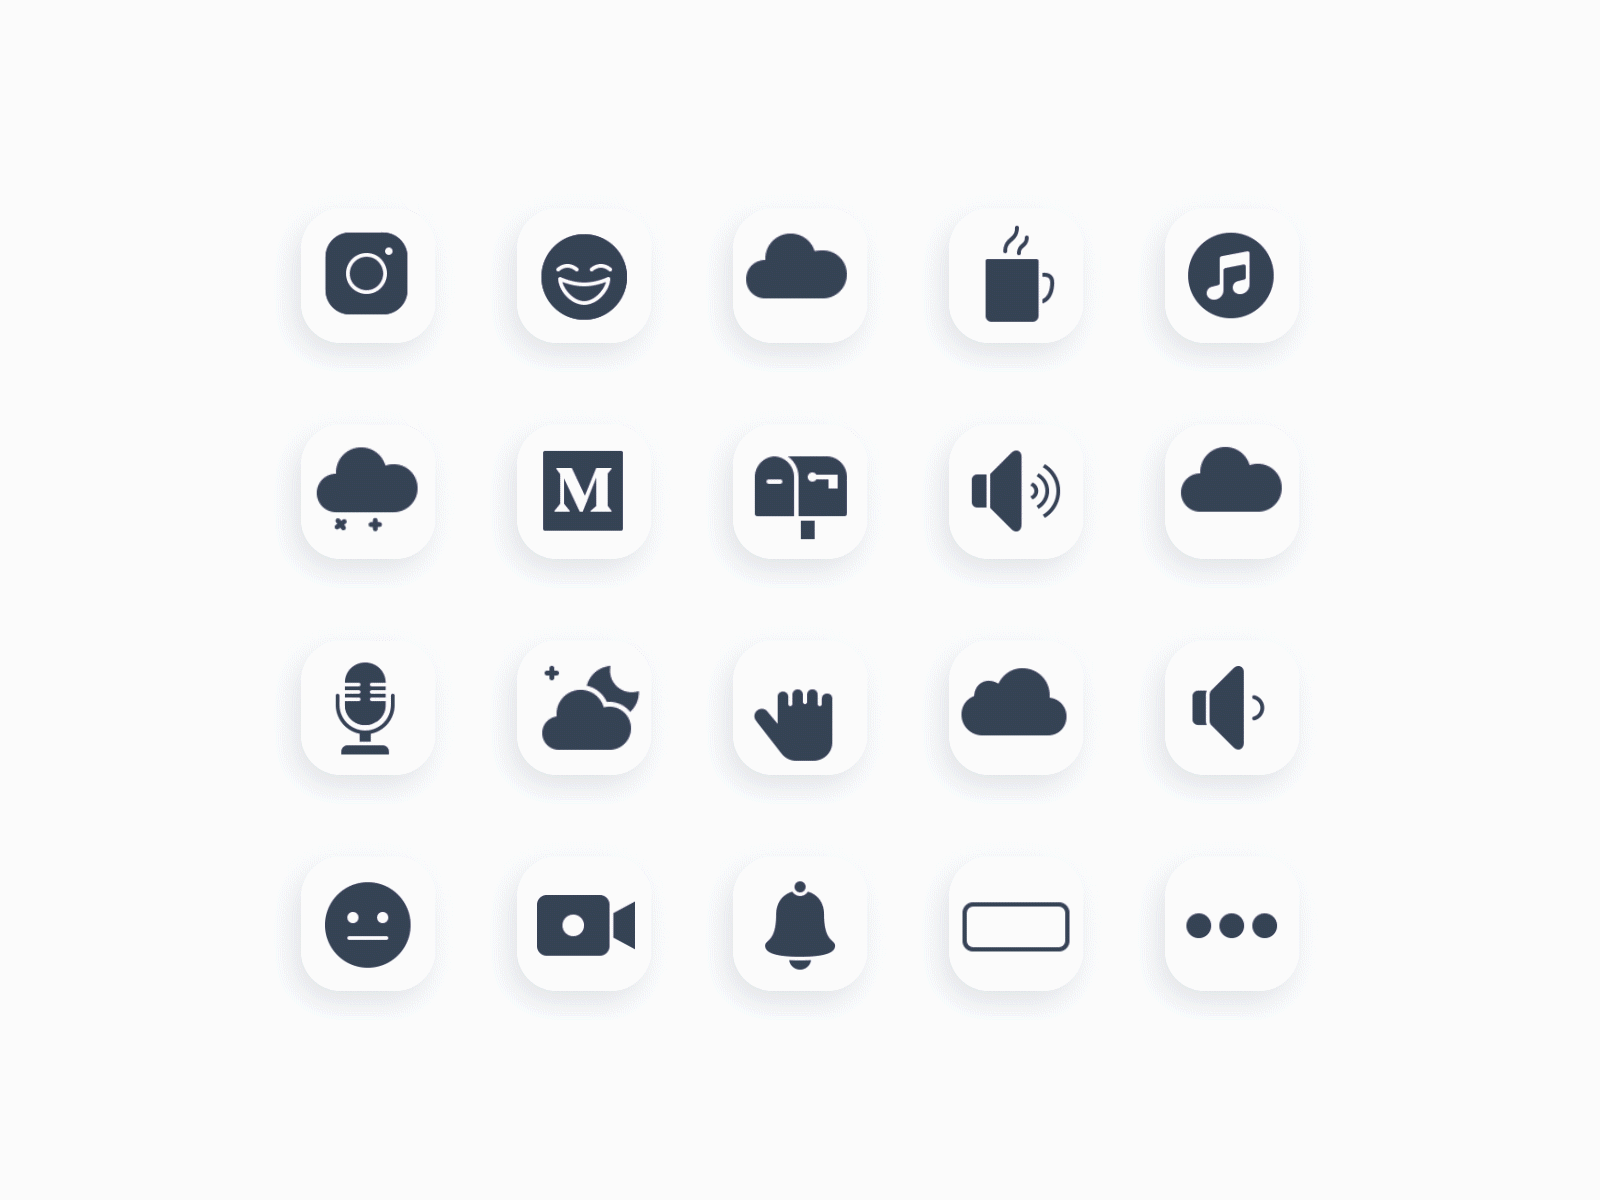 iOS Filled Animated Icons by Denis Starko for Icons8 on Dribbble